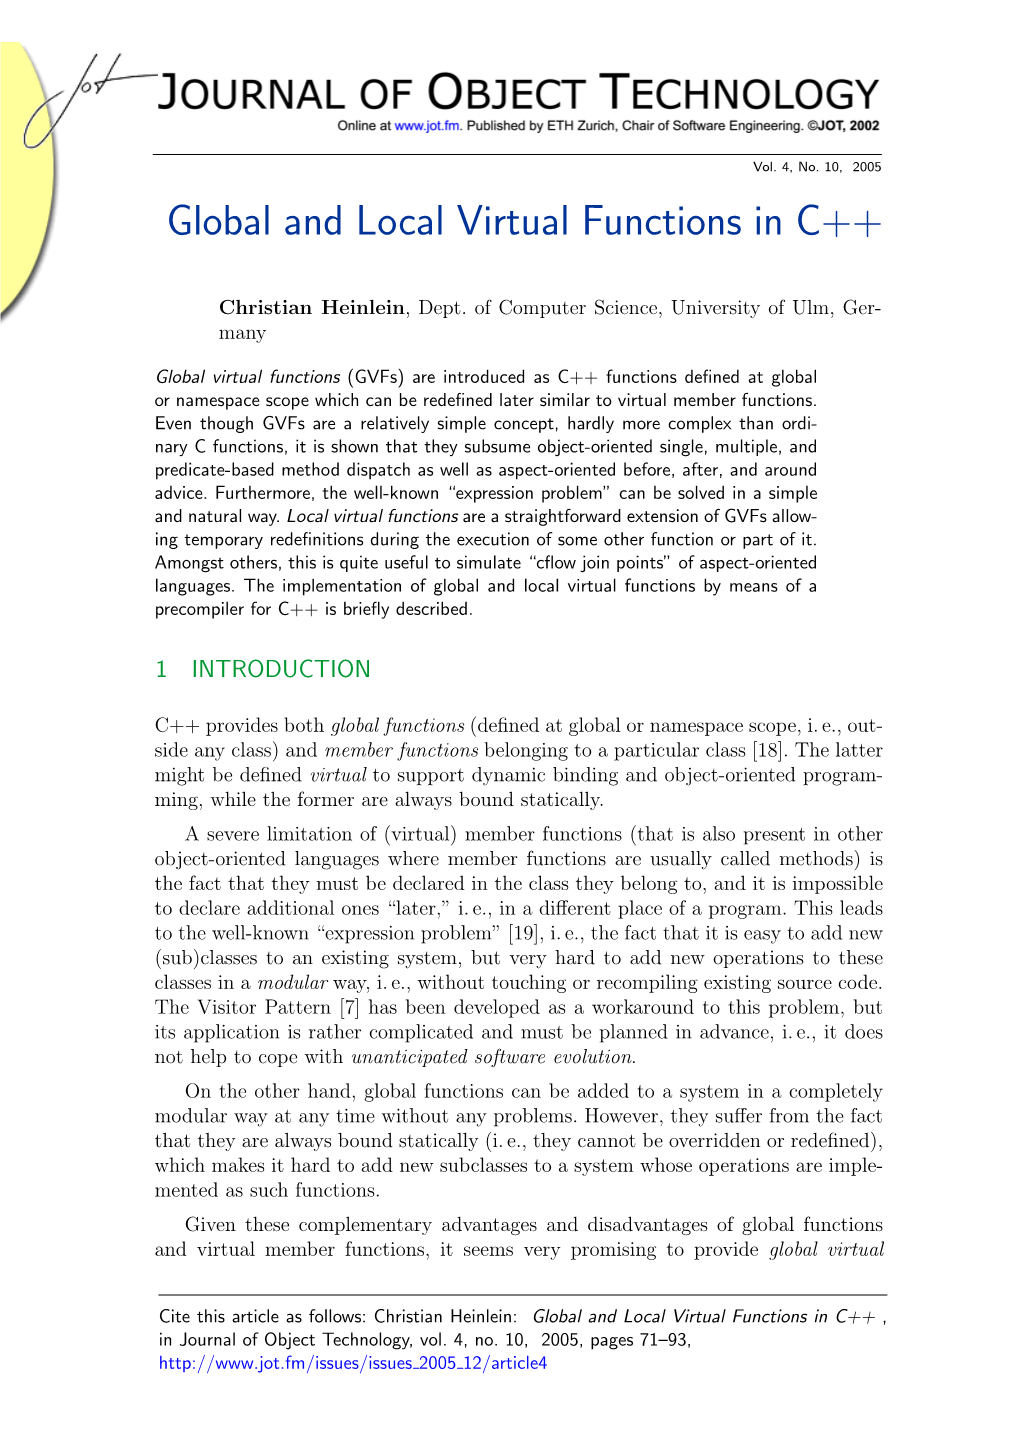 Global and Local Virtual Functions in C++